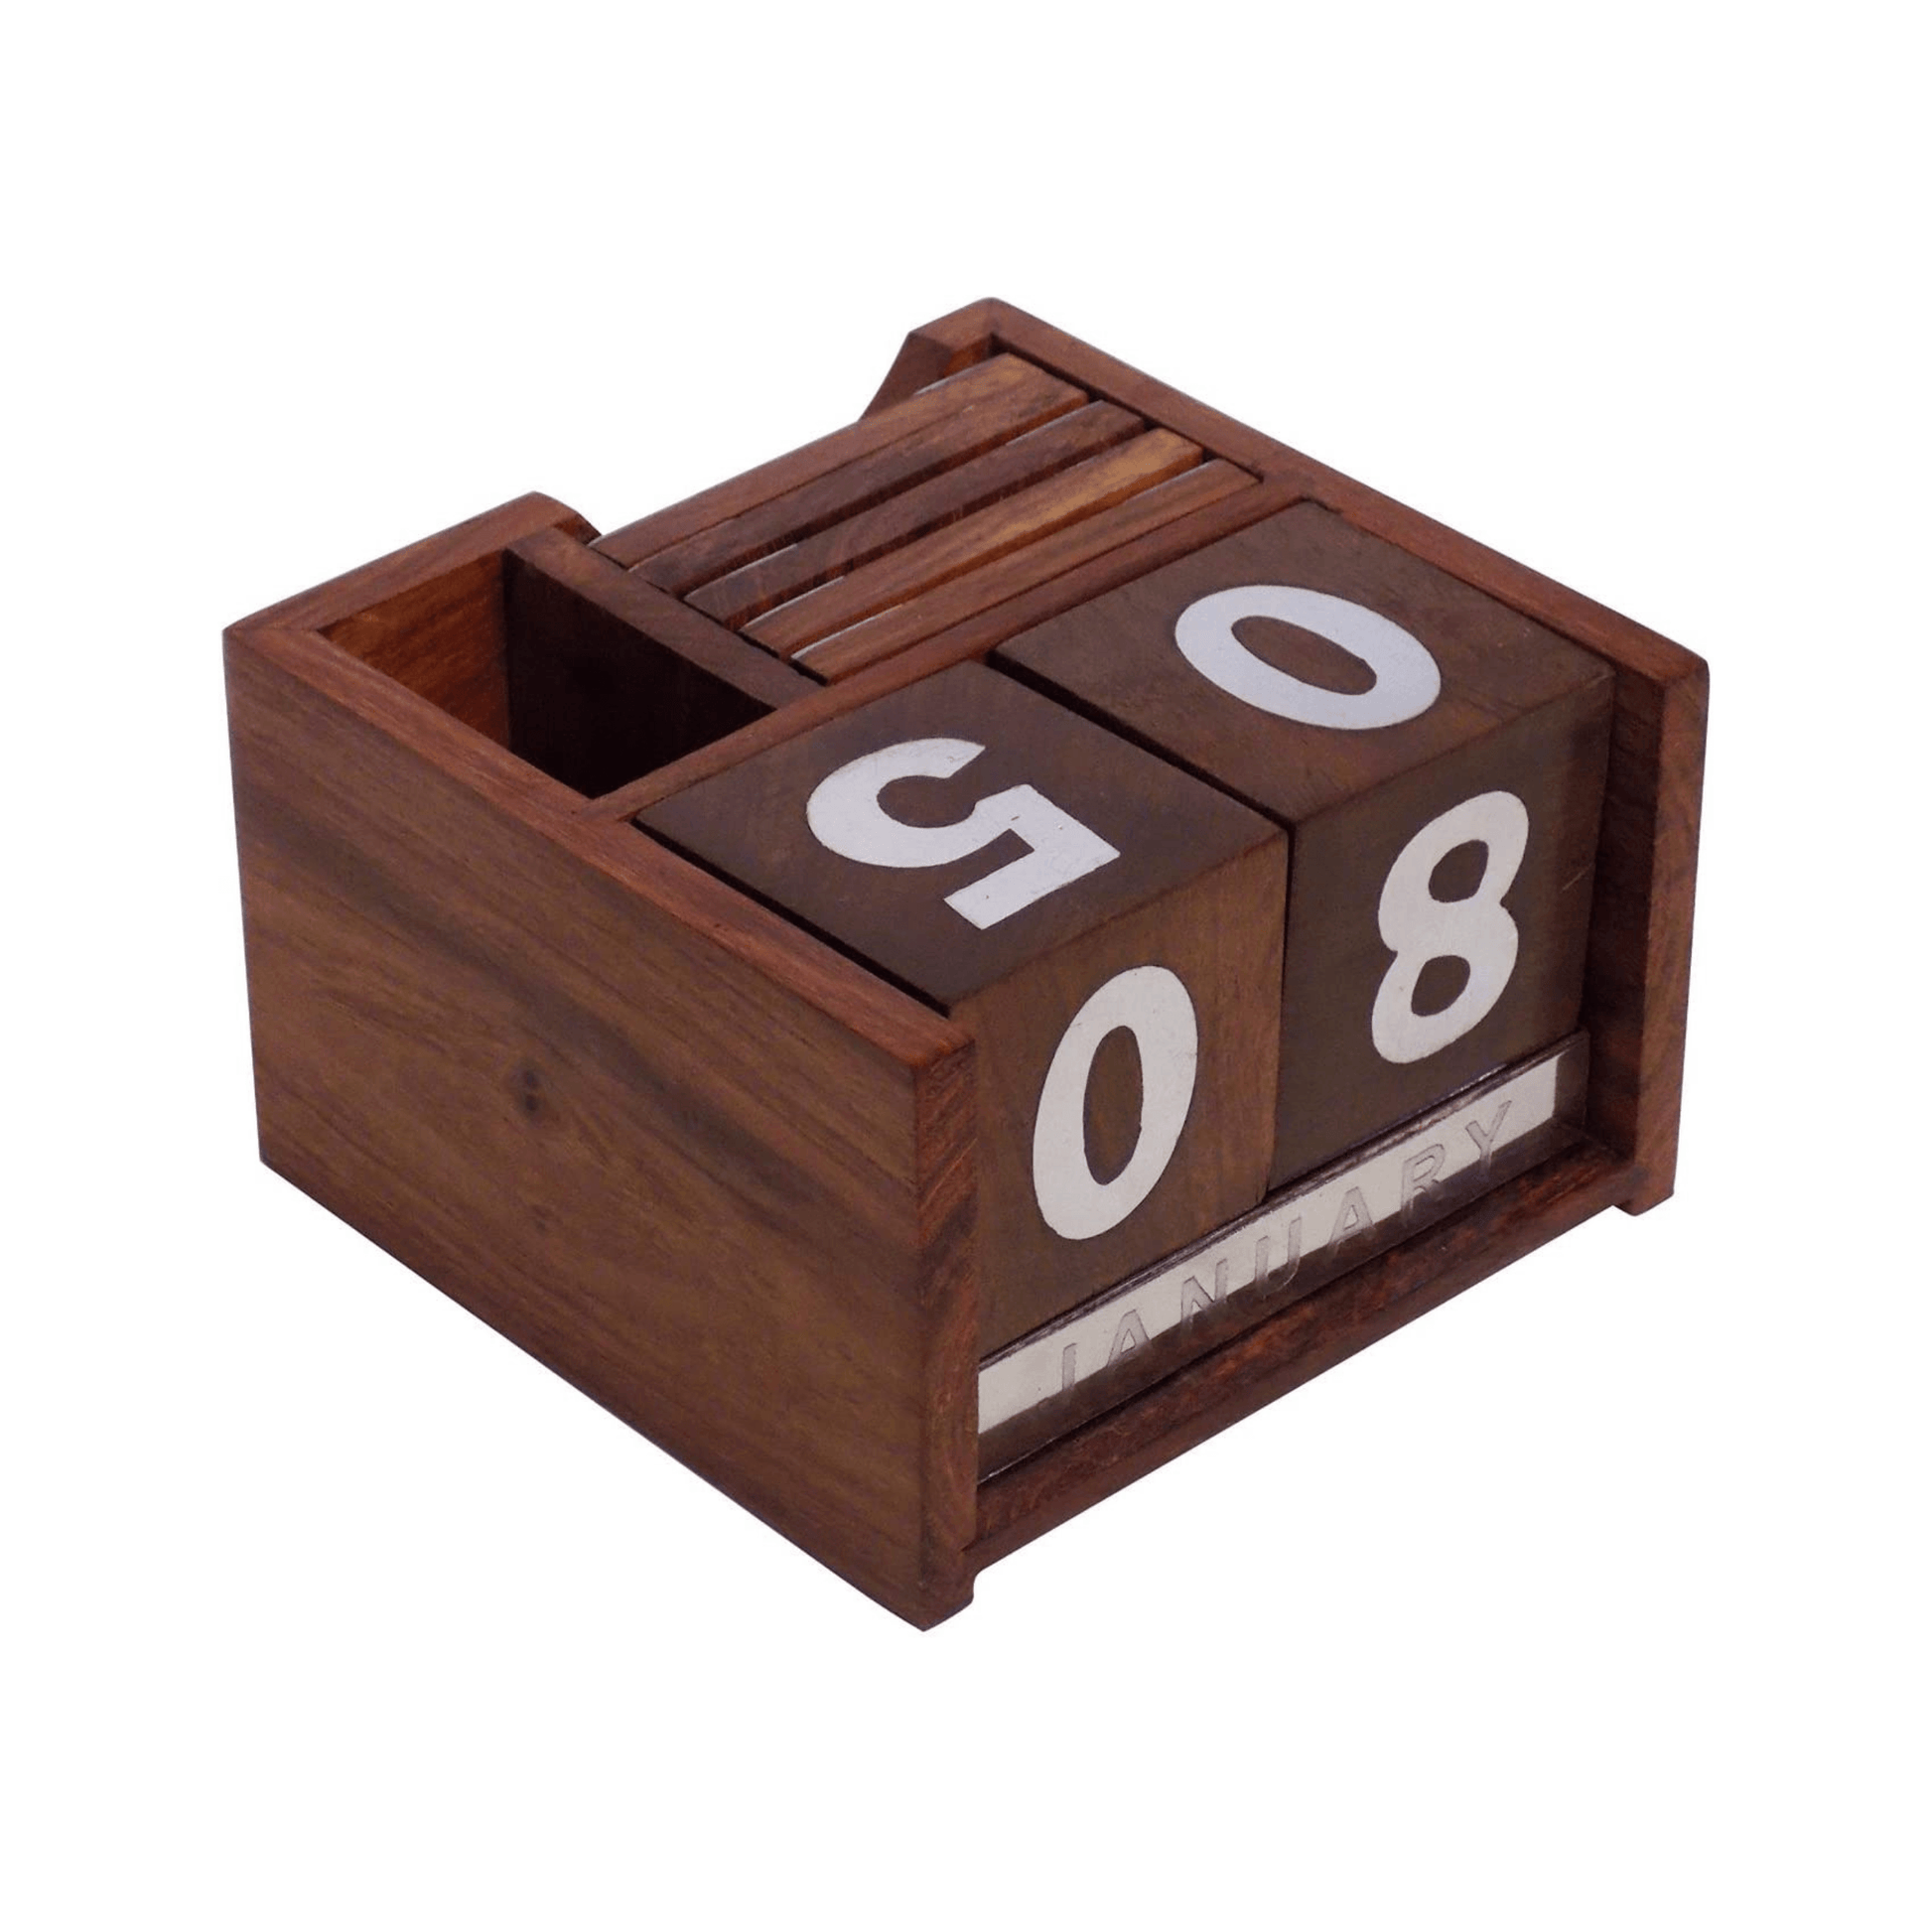 3 in 1 Perpetual Wooden Calendar with 6 Coasters and Pen Holder - Stylla London